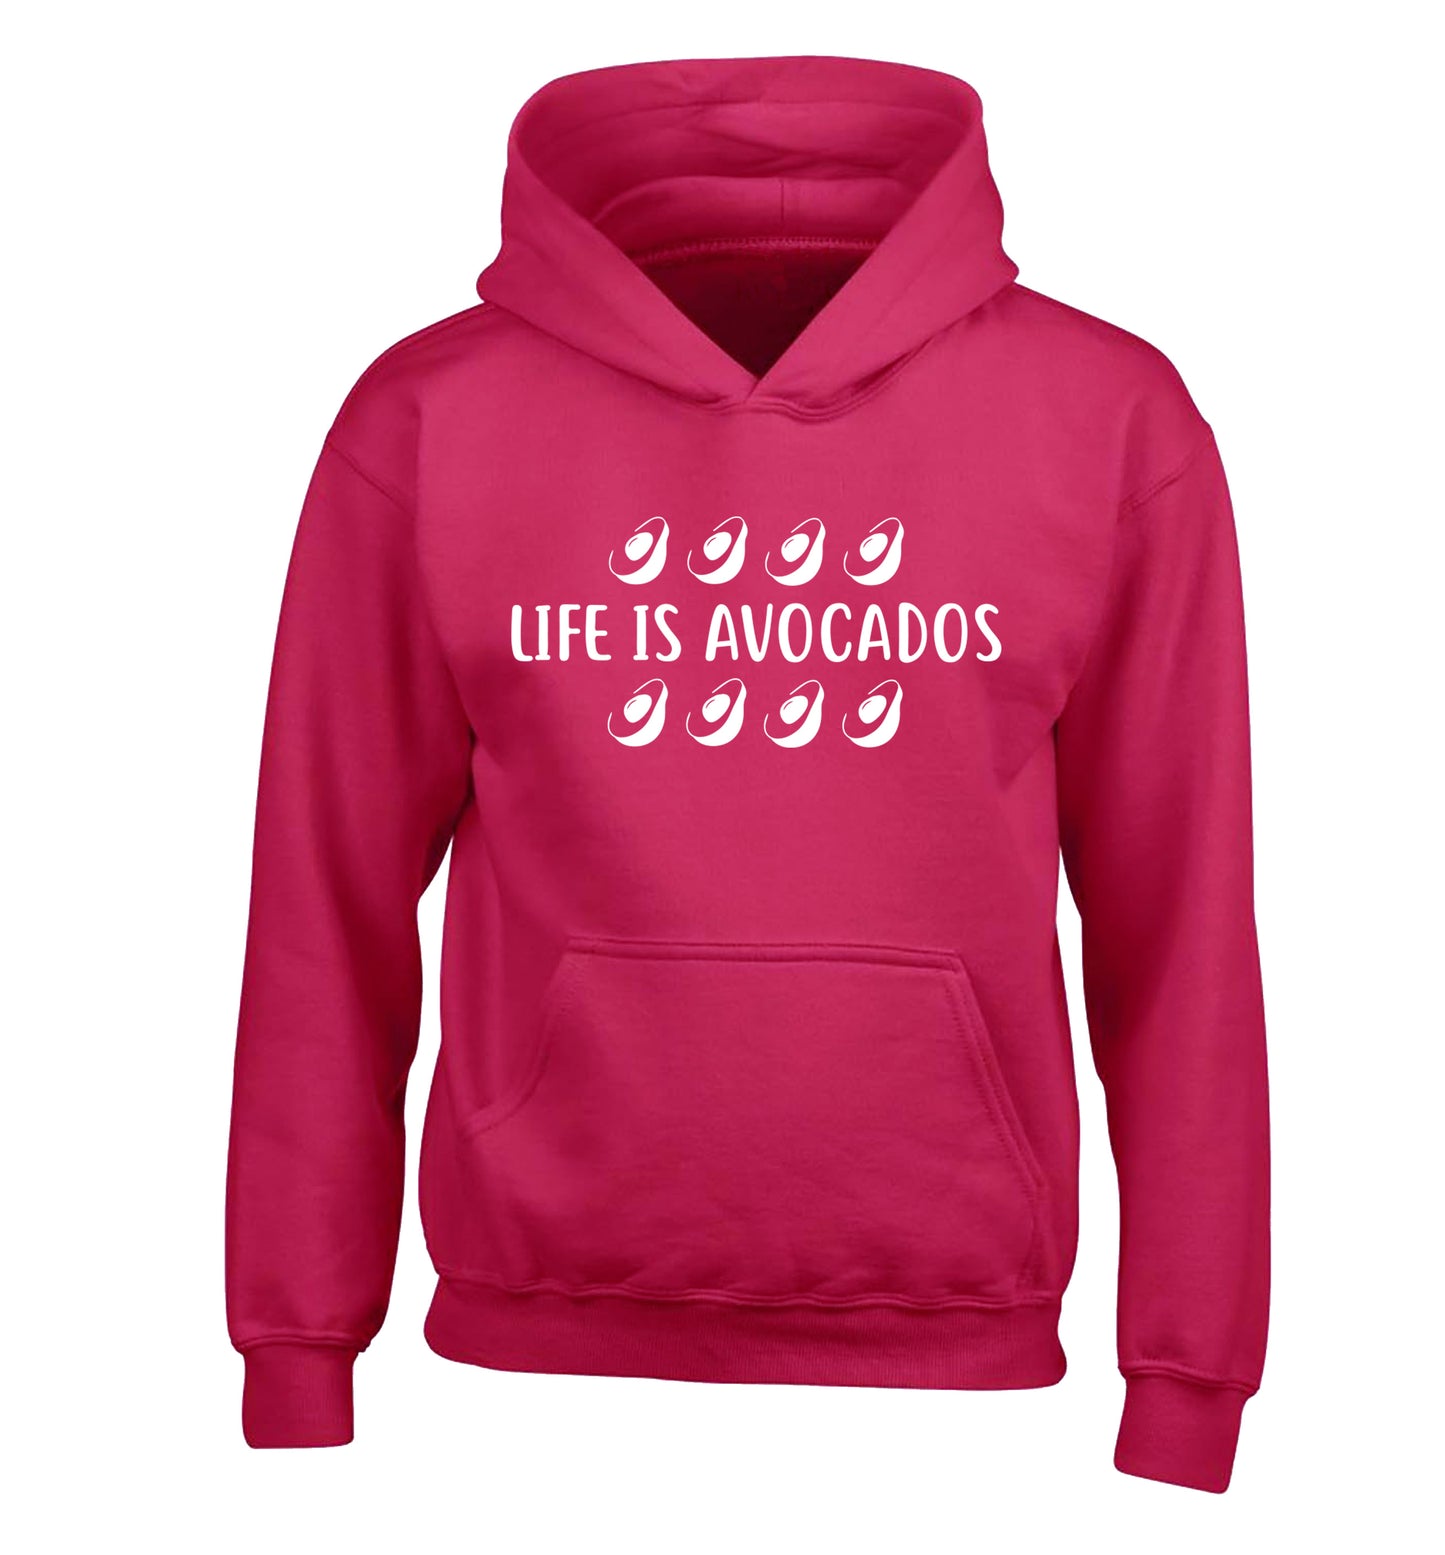 Life is avocados children's pink hoodie 12-14 Years